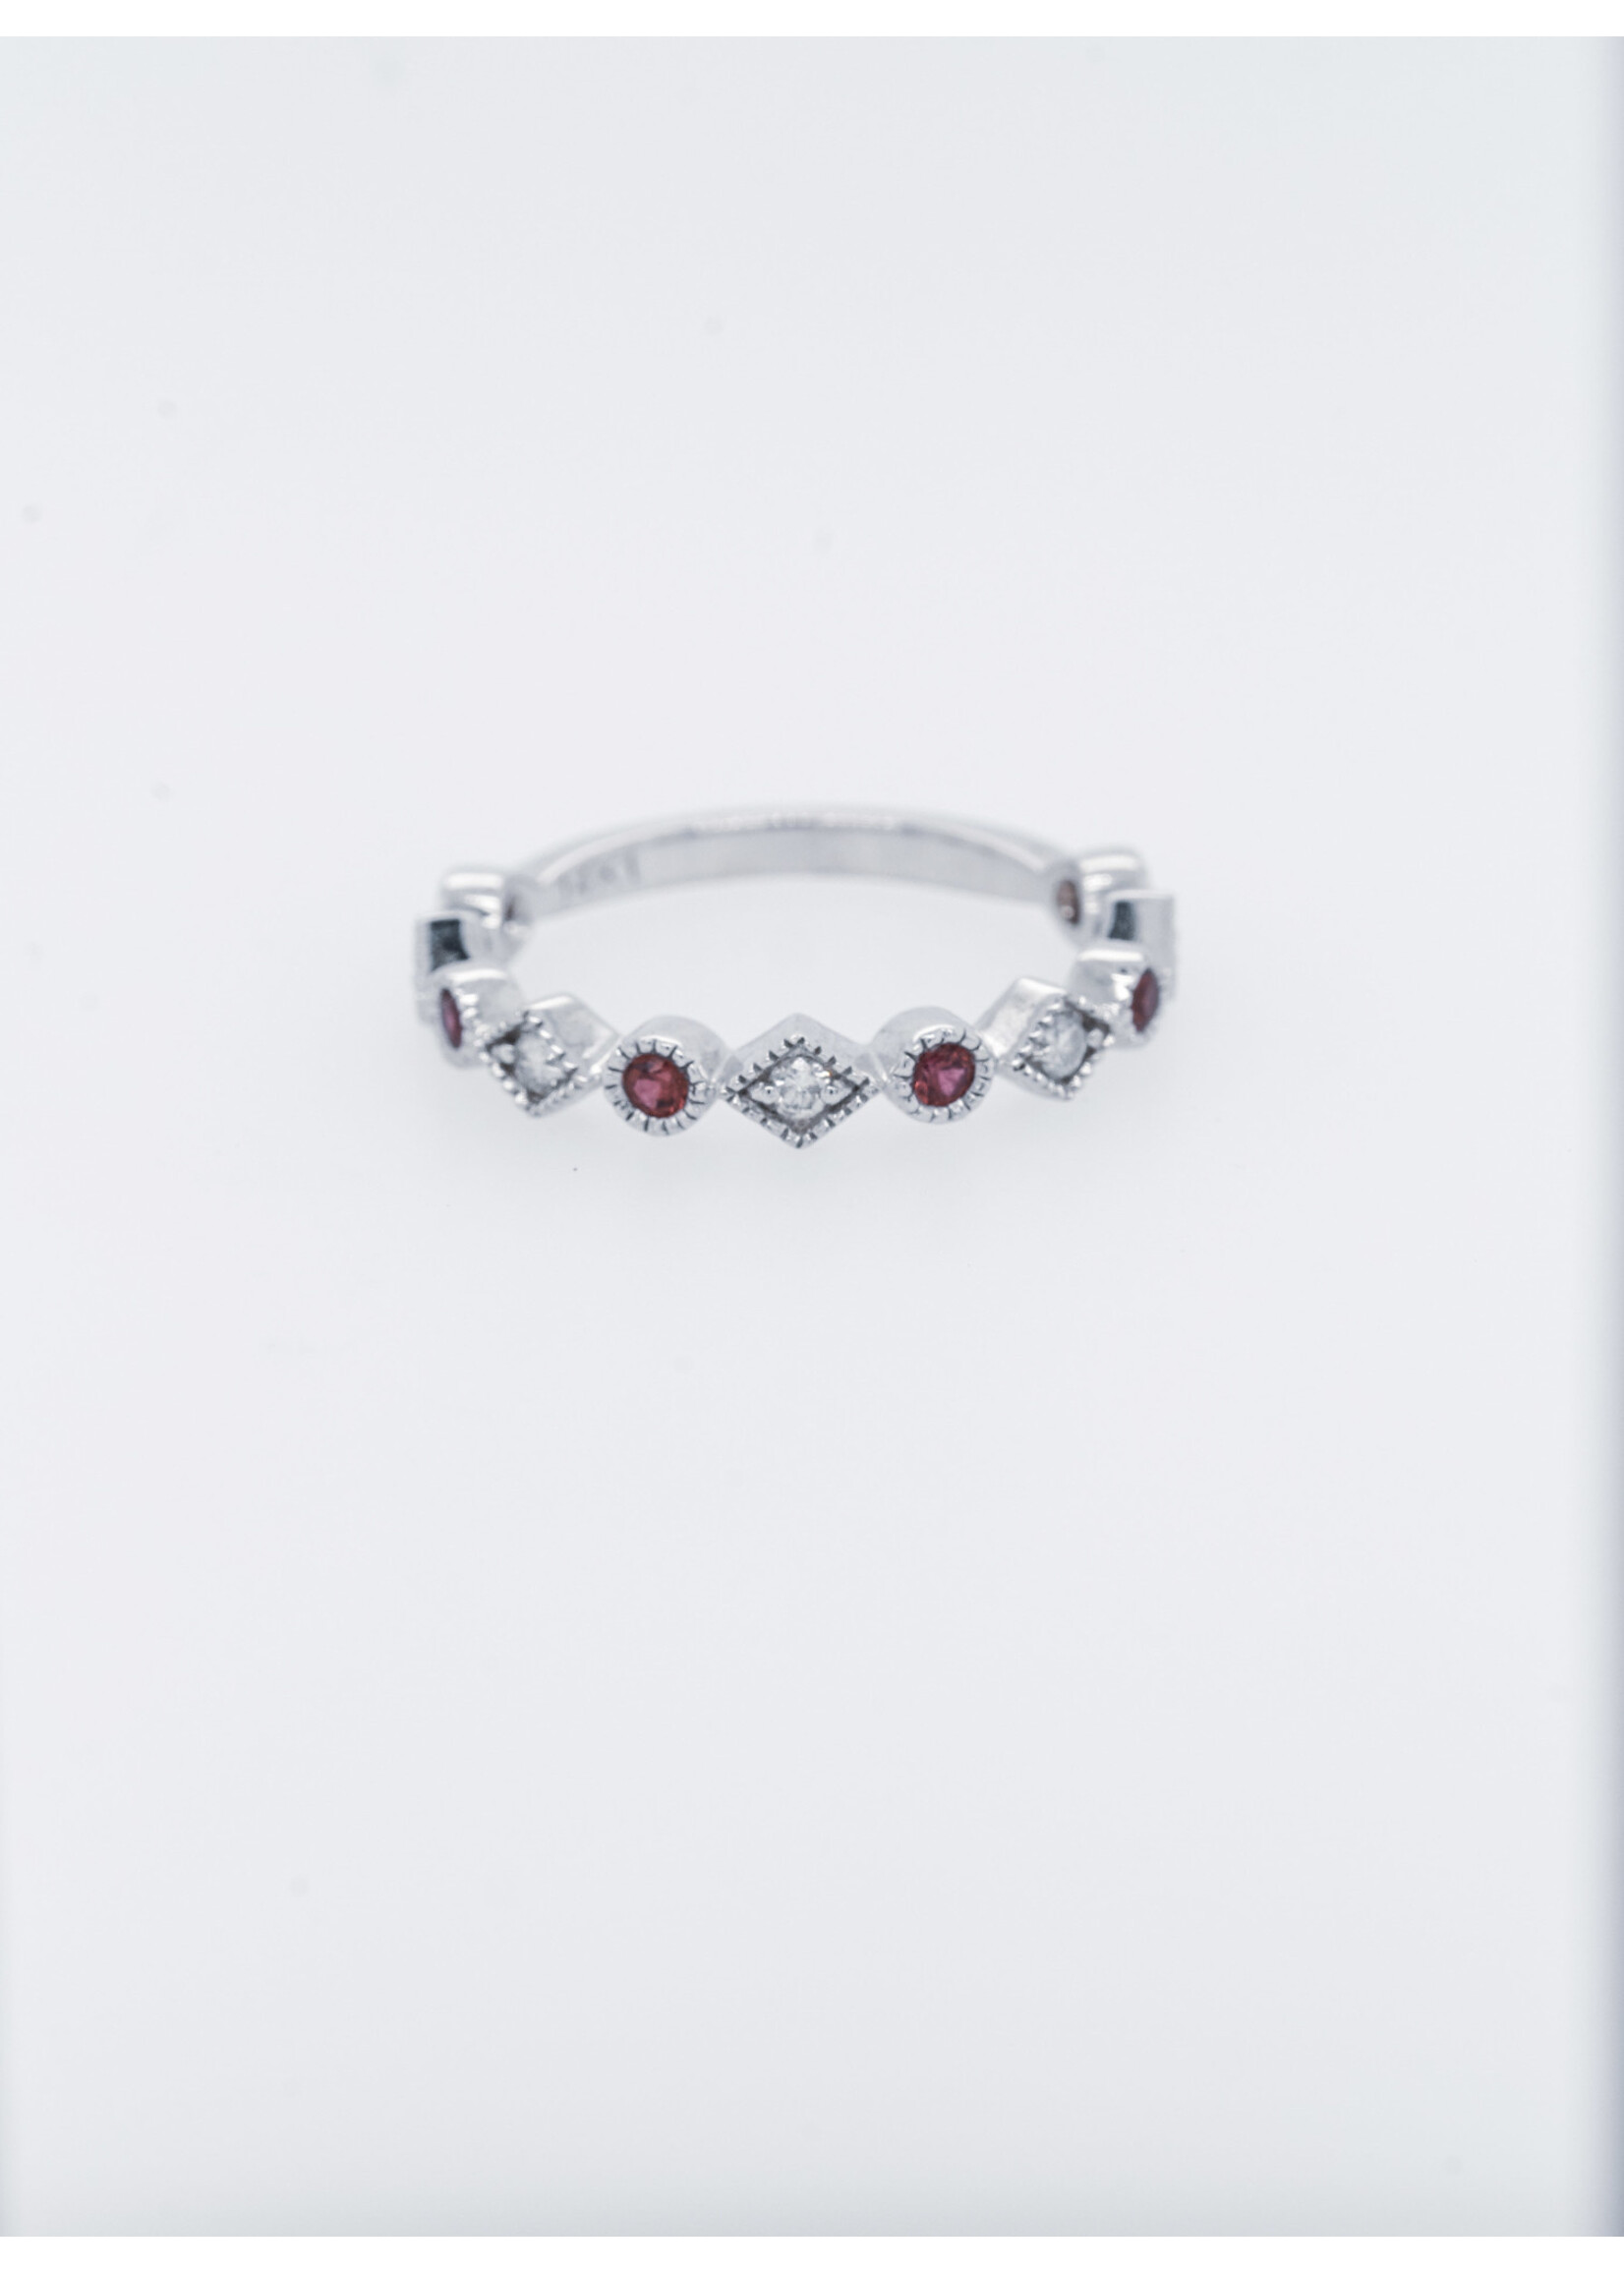 VLE-14KW 2.3g 2.4g .14ctw Diamond .22ctw Ruby Stackable Band (size 7)